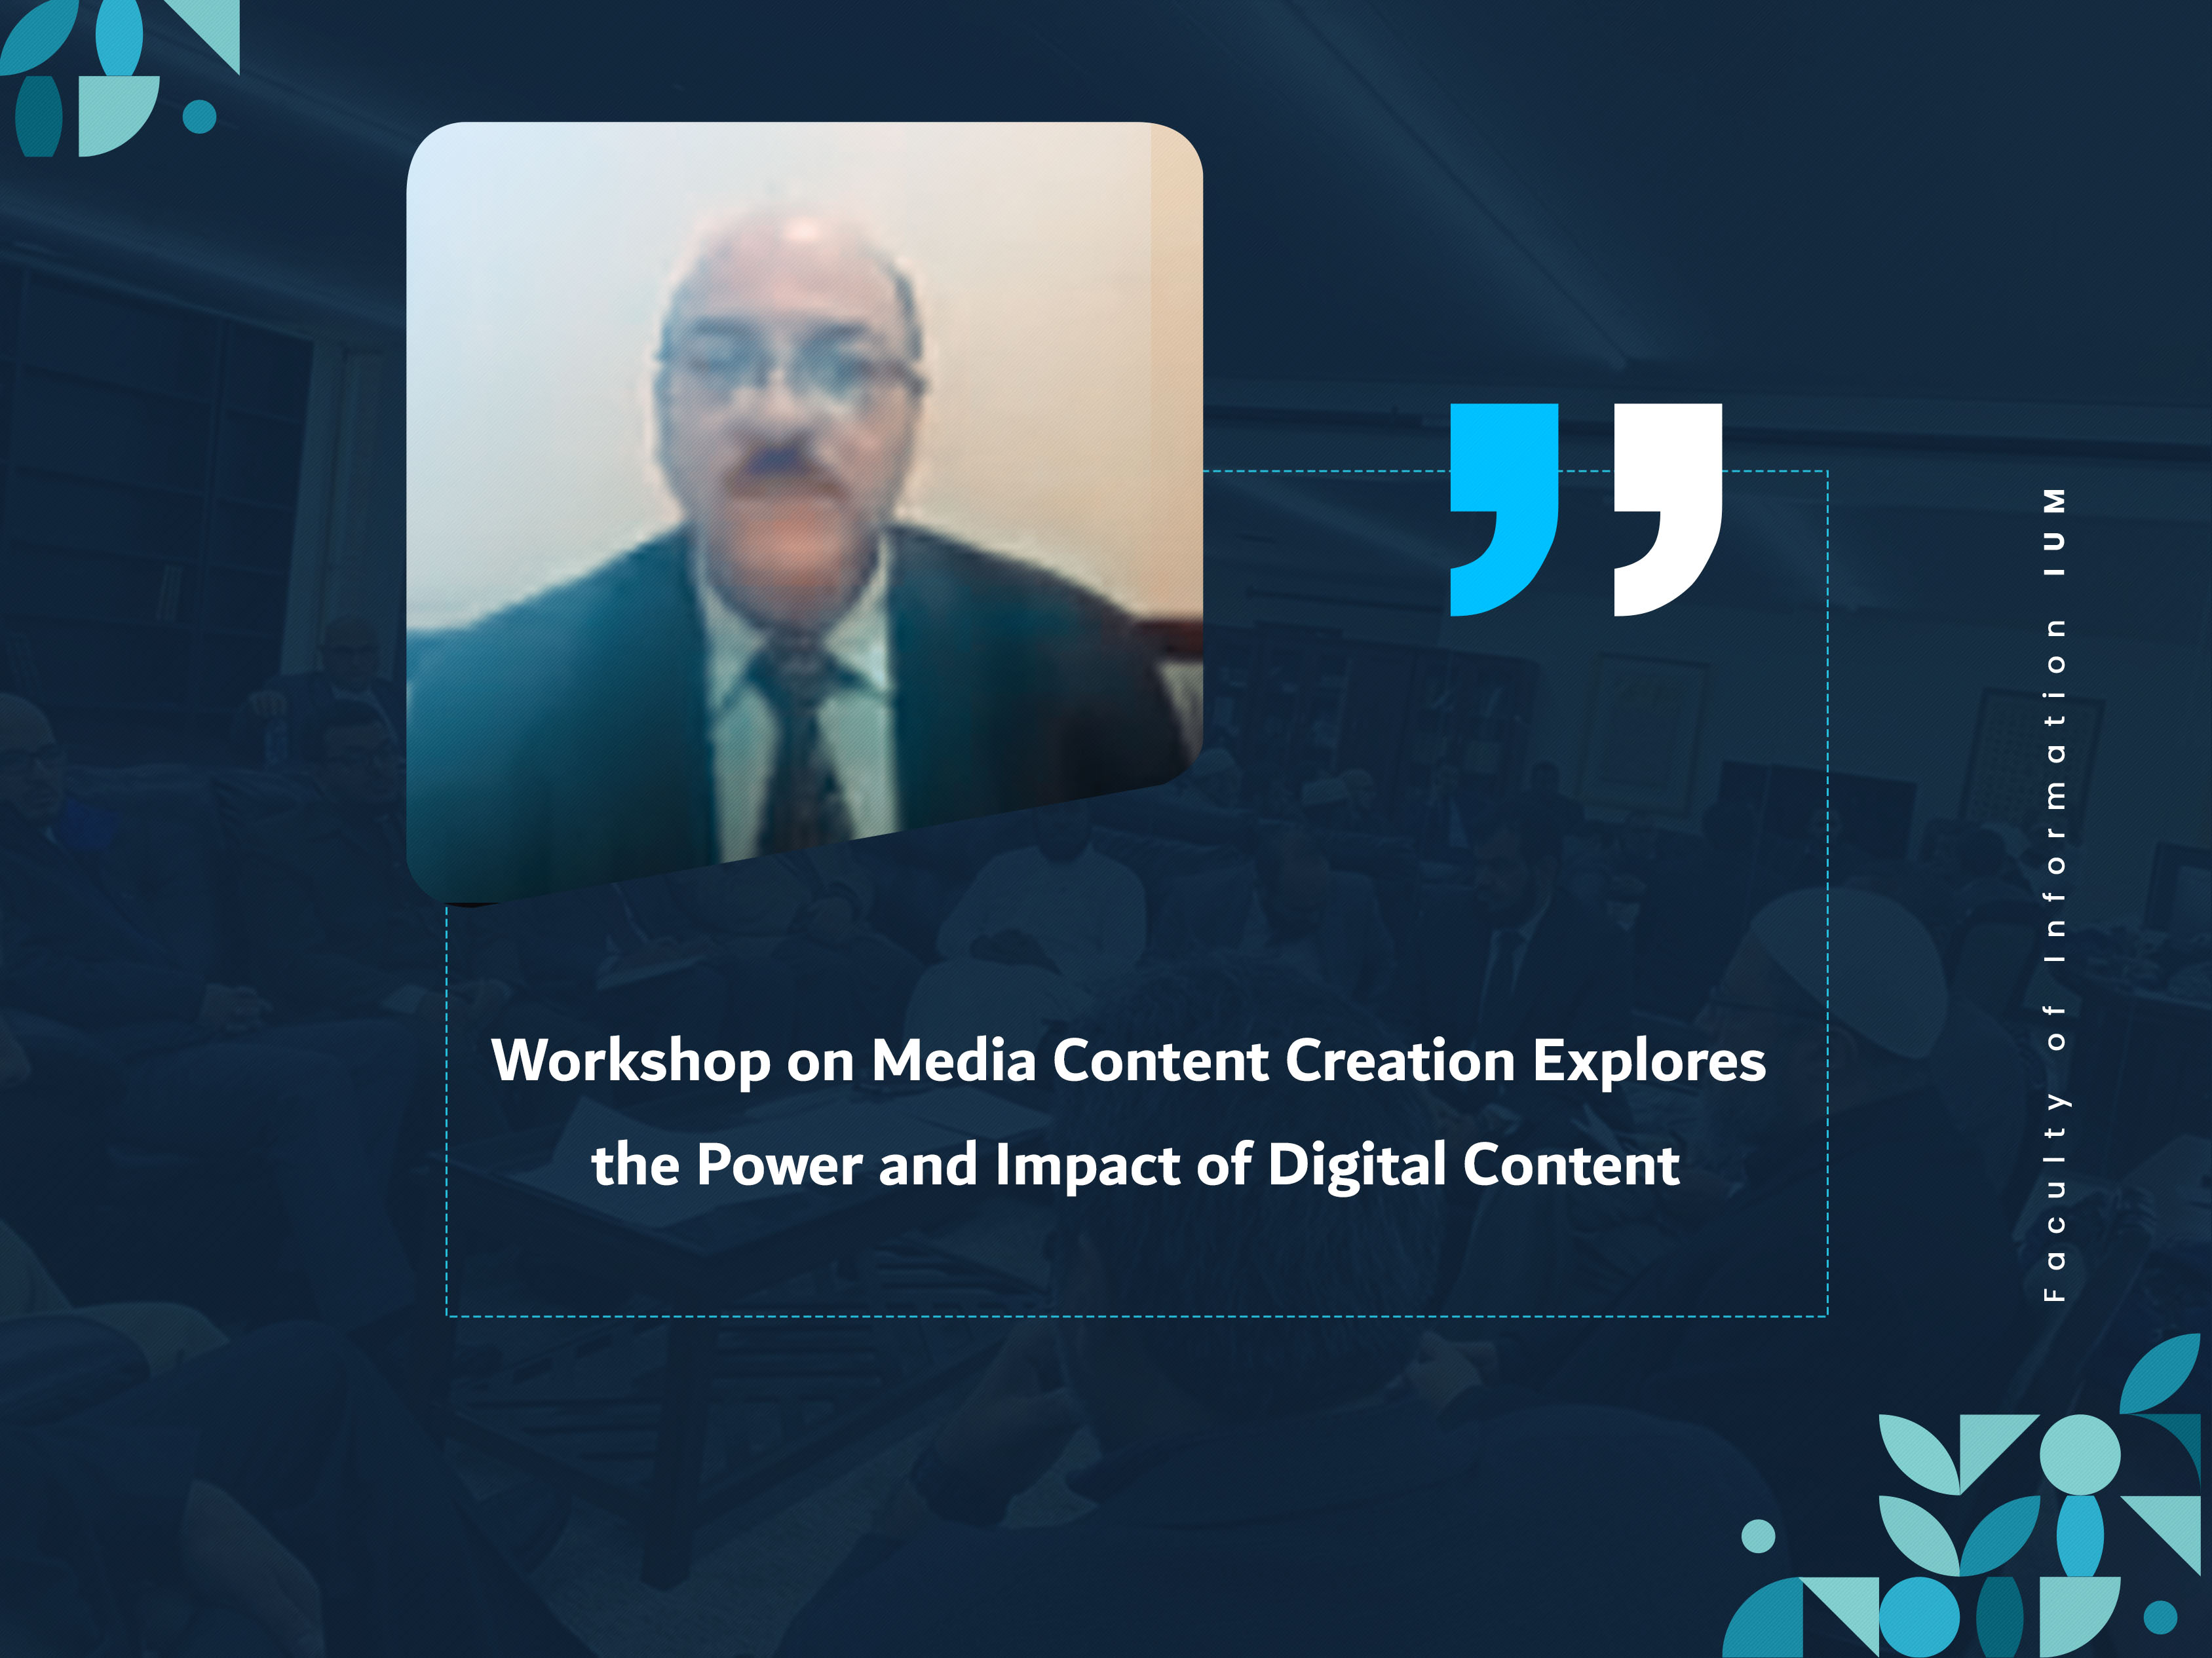 Workshop on Media Content Creation Explores the Power and Impact of Digital Content